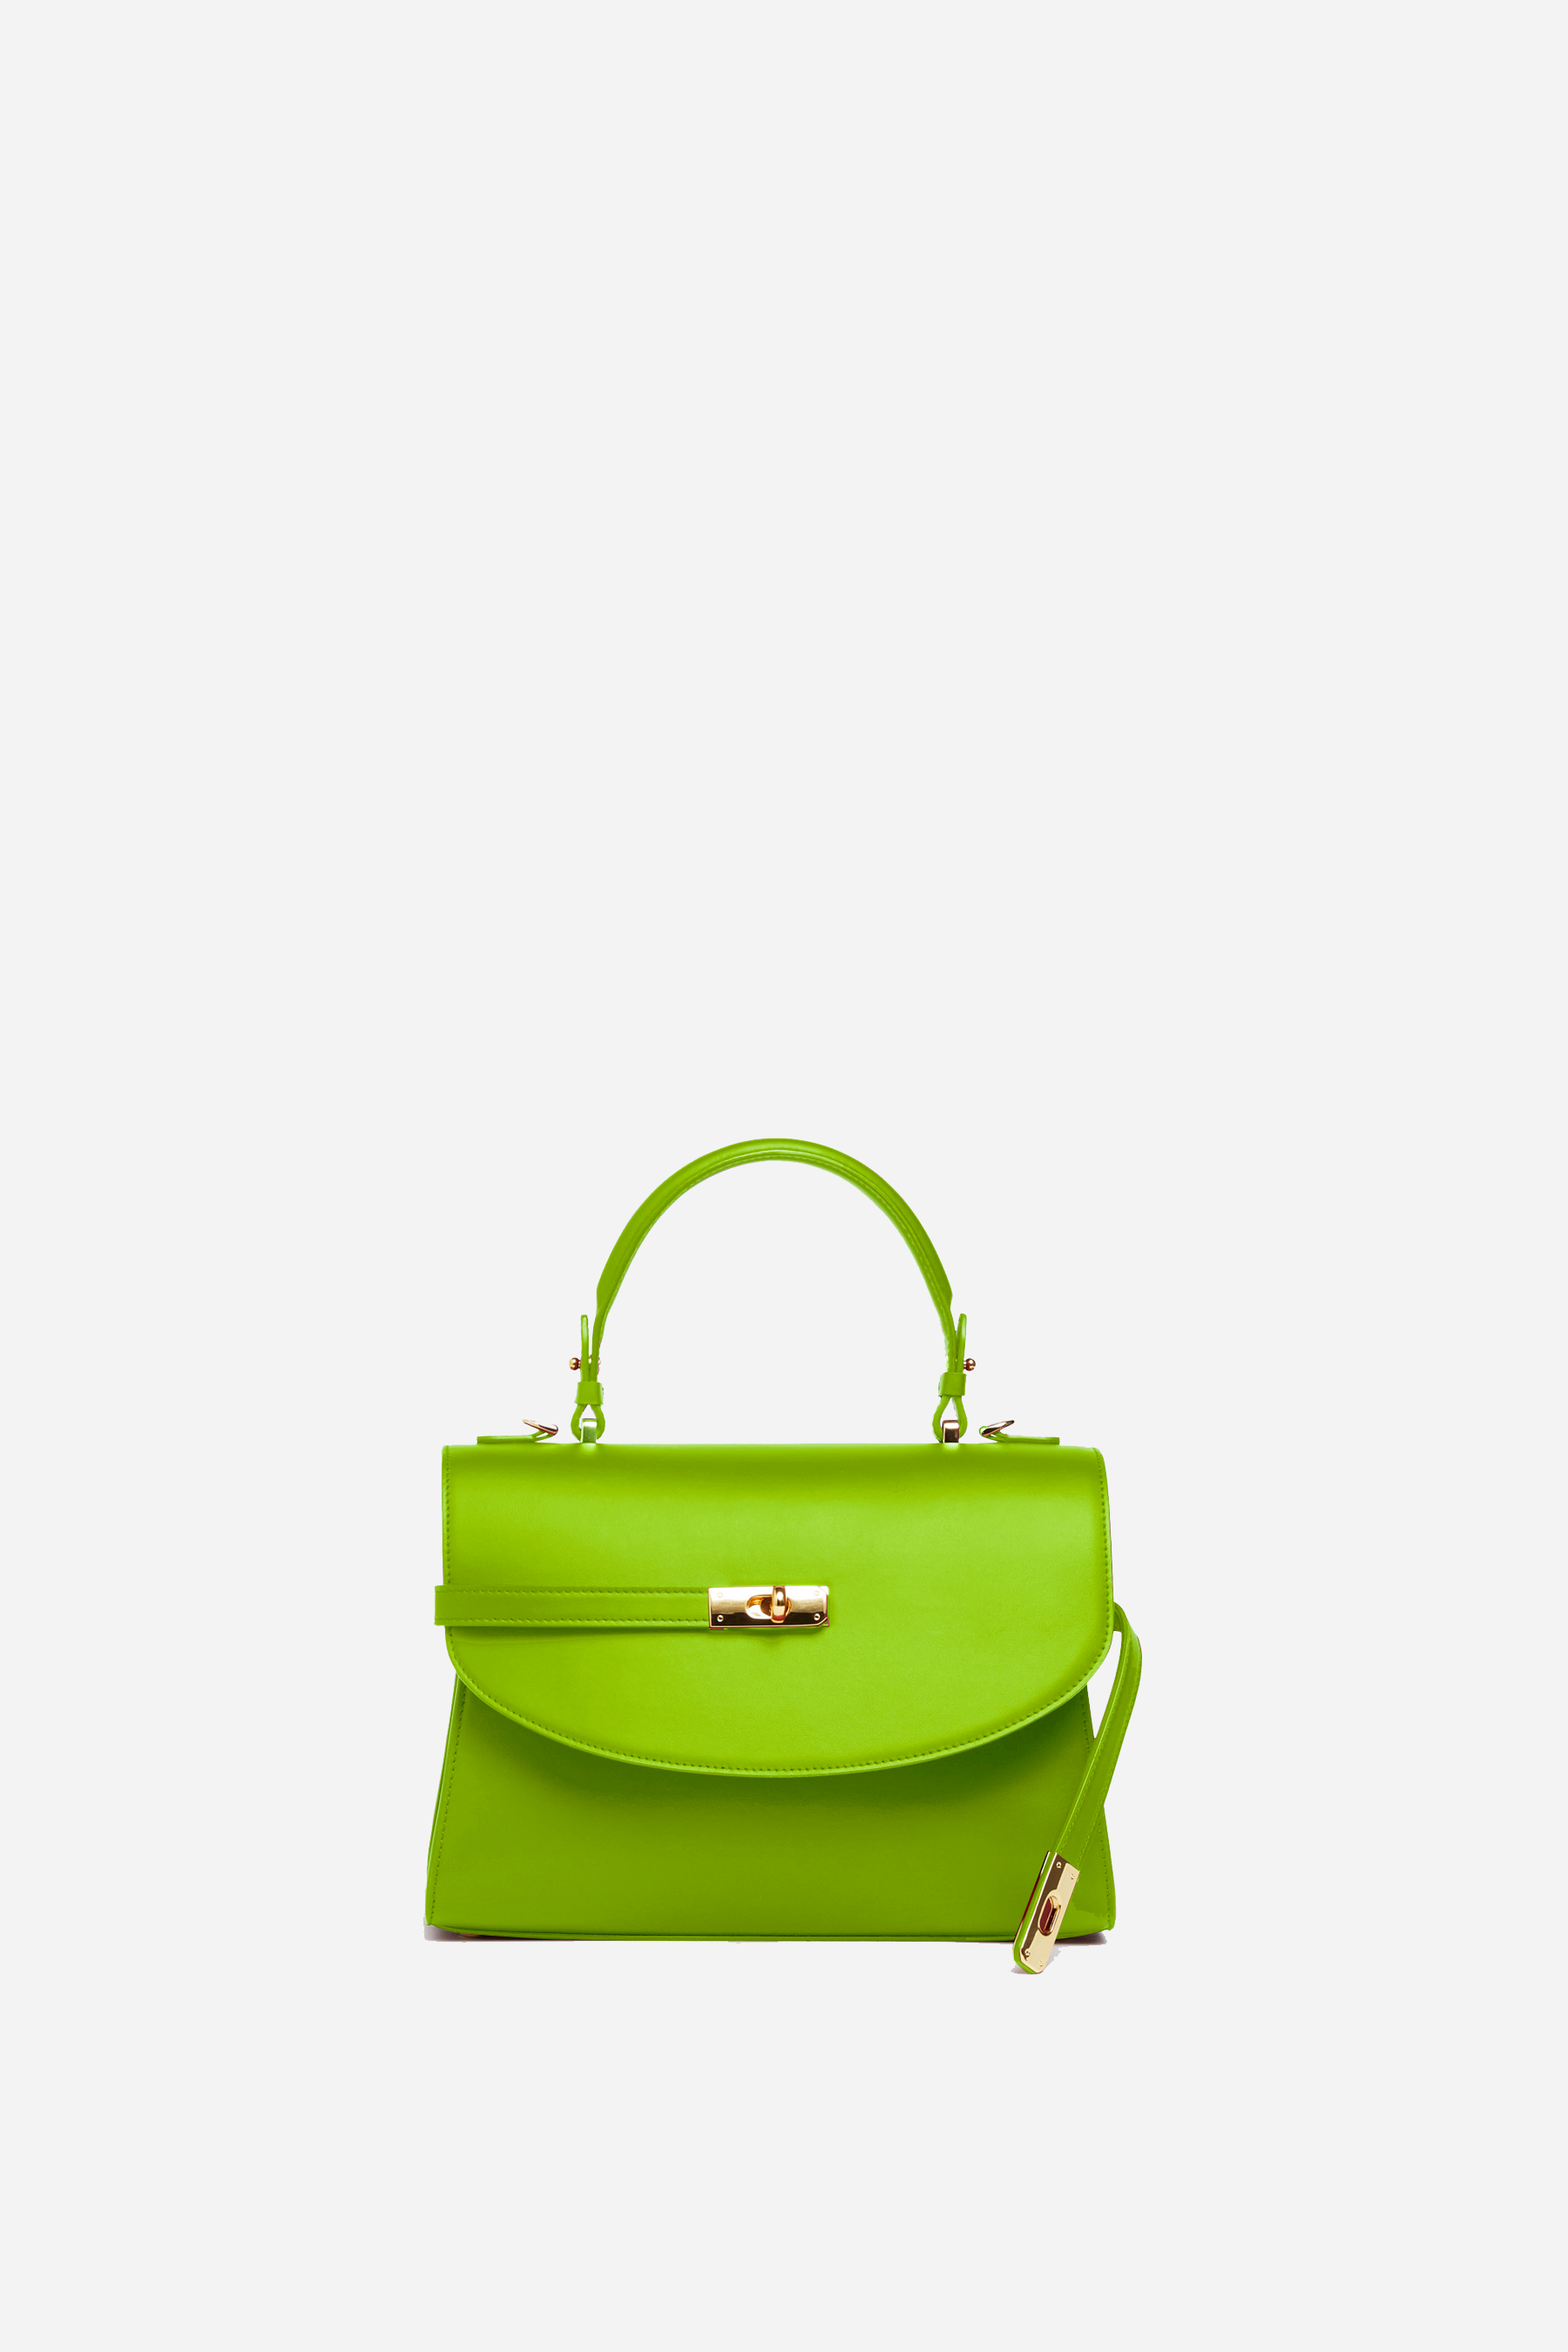 5 HERMES BAGS I DON'T REGRET NOT BUYING + 1 CHANEL